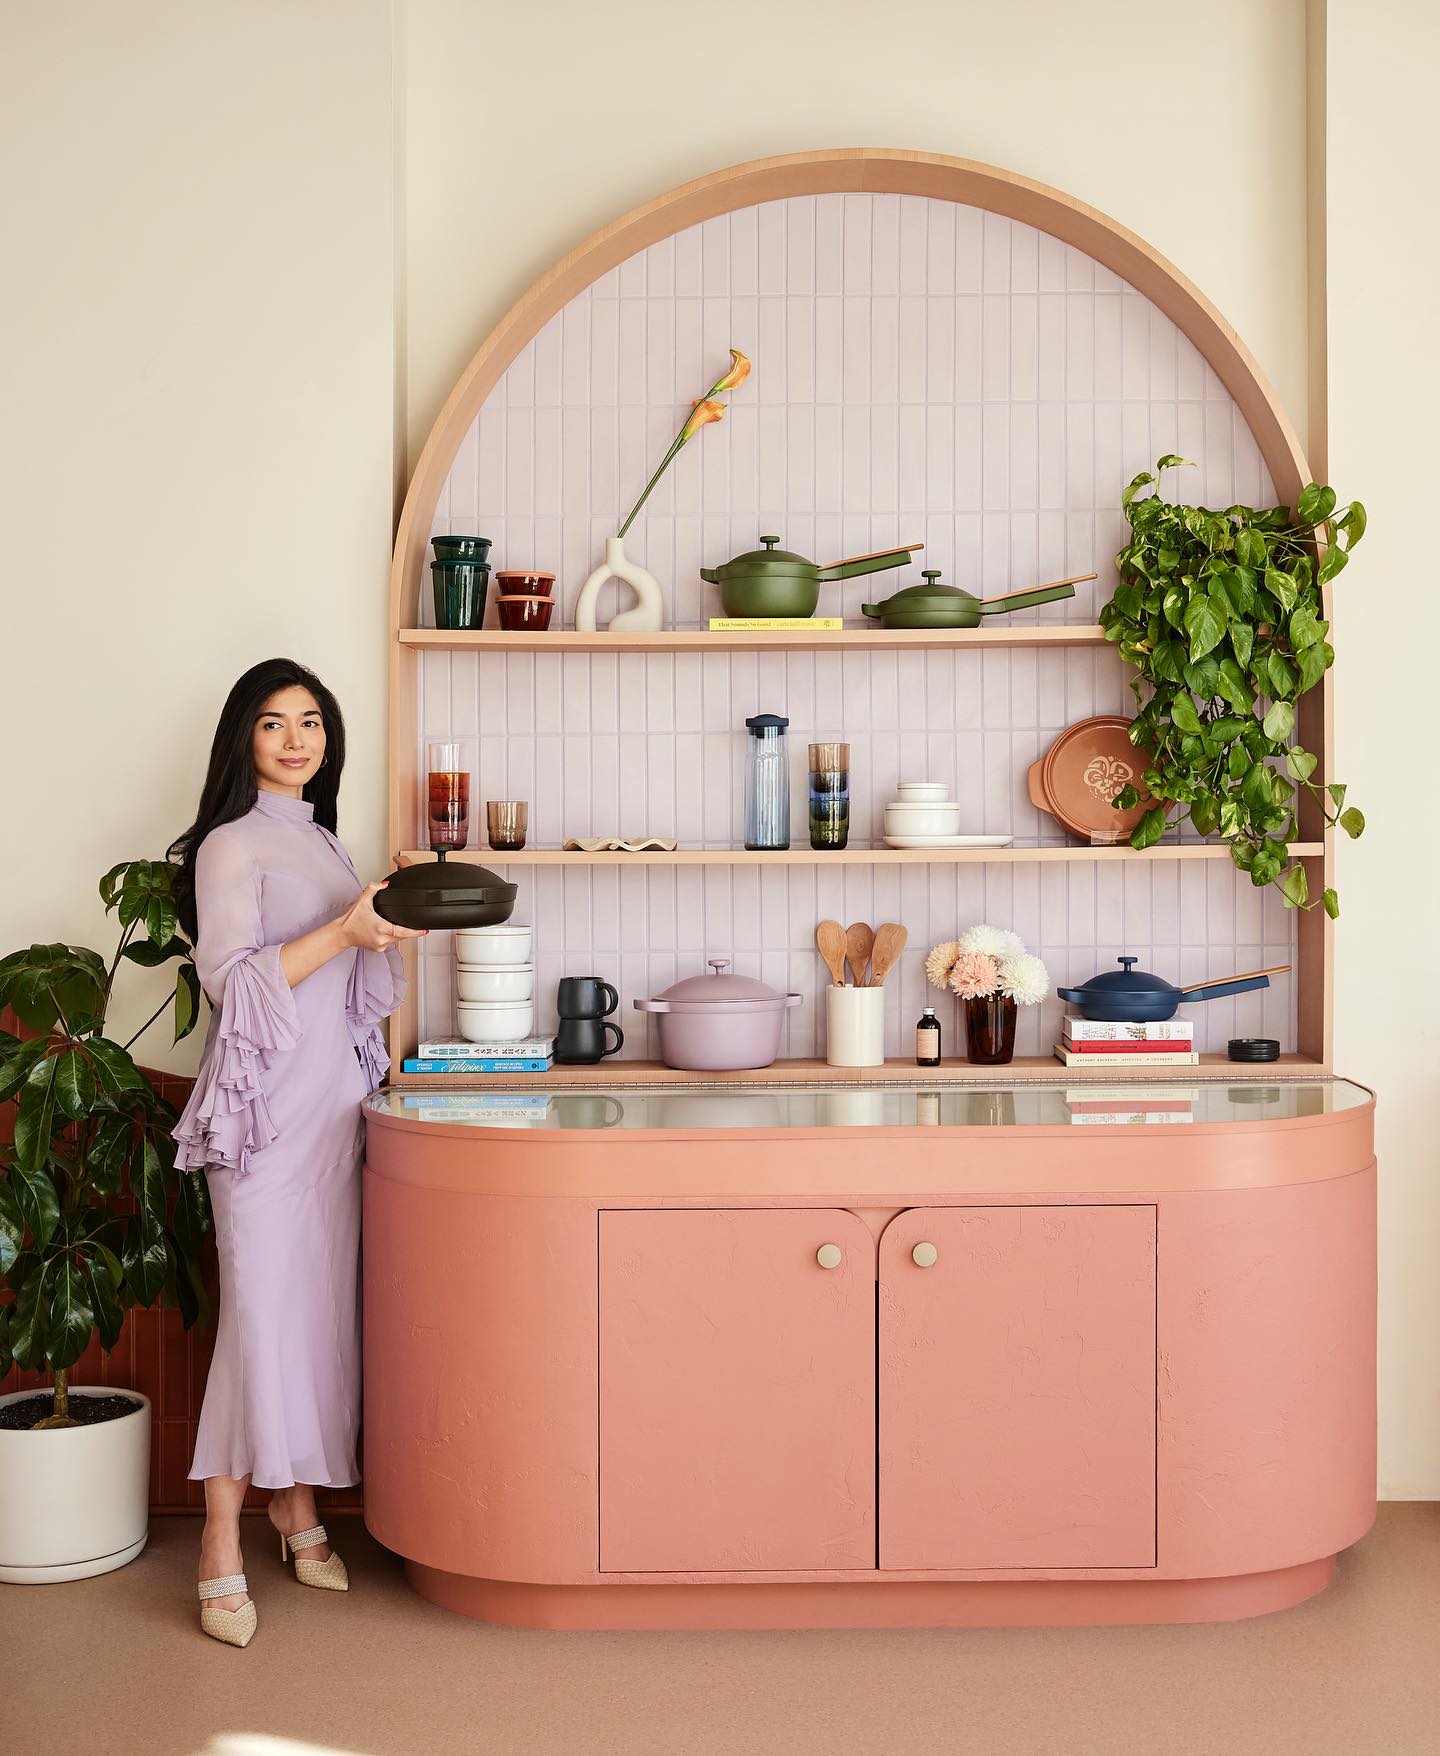 A woman is holding an Our Place pot. She is to the left of a retro-inspired display of other Our Place products.